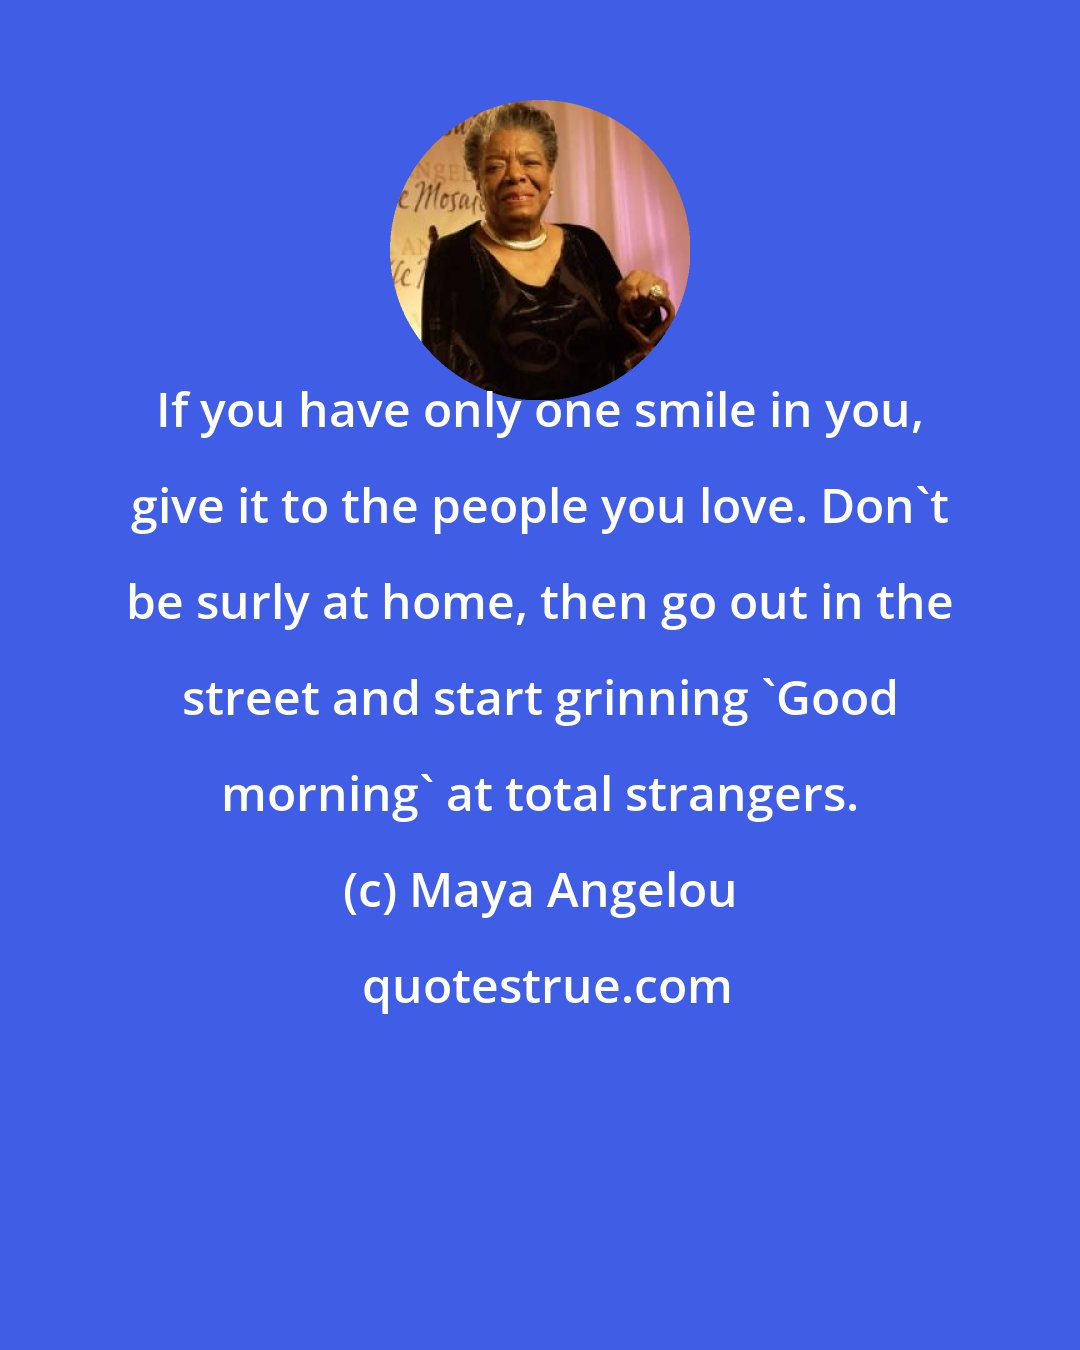 Maya Angelou: If you have only one smile in you, give it to the people you love. Don't be surly at home, then go out in the street and start grinning 'Good morning' at total strangers.